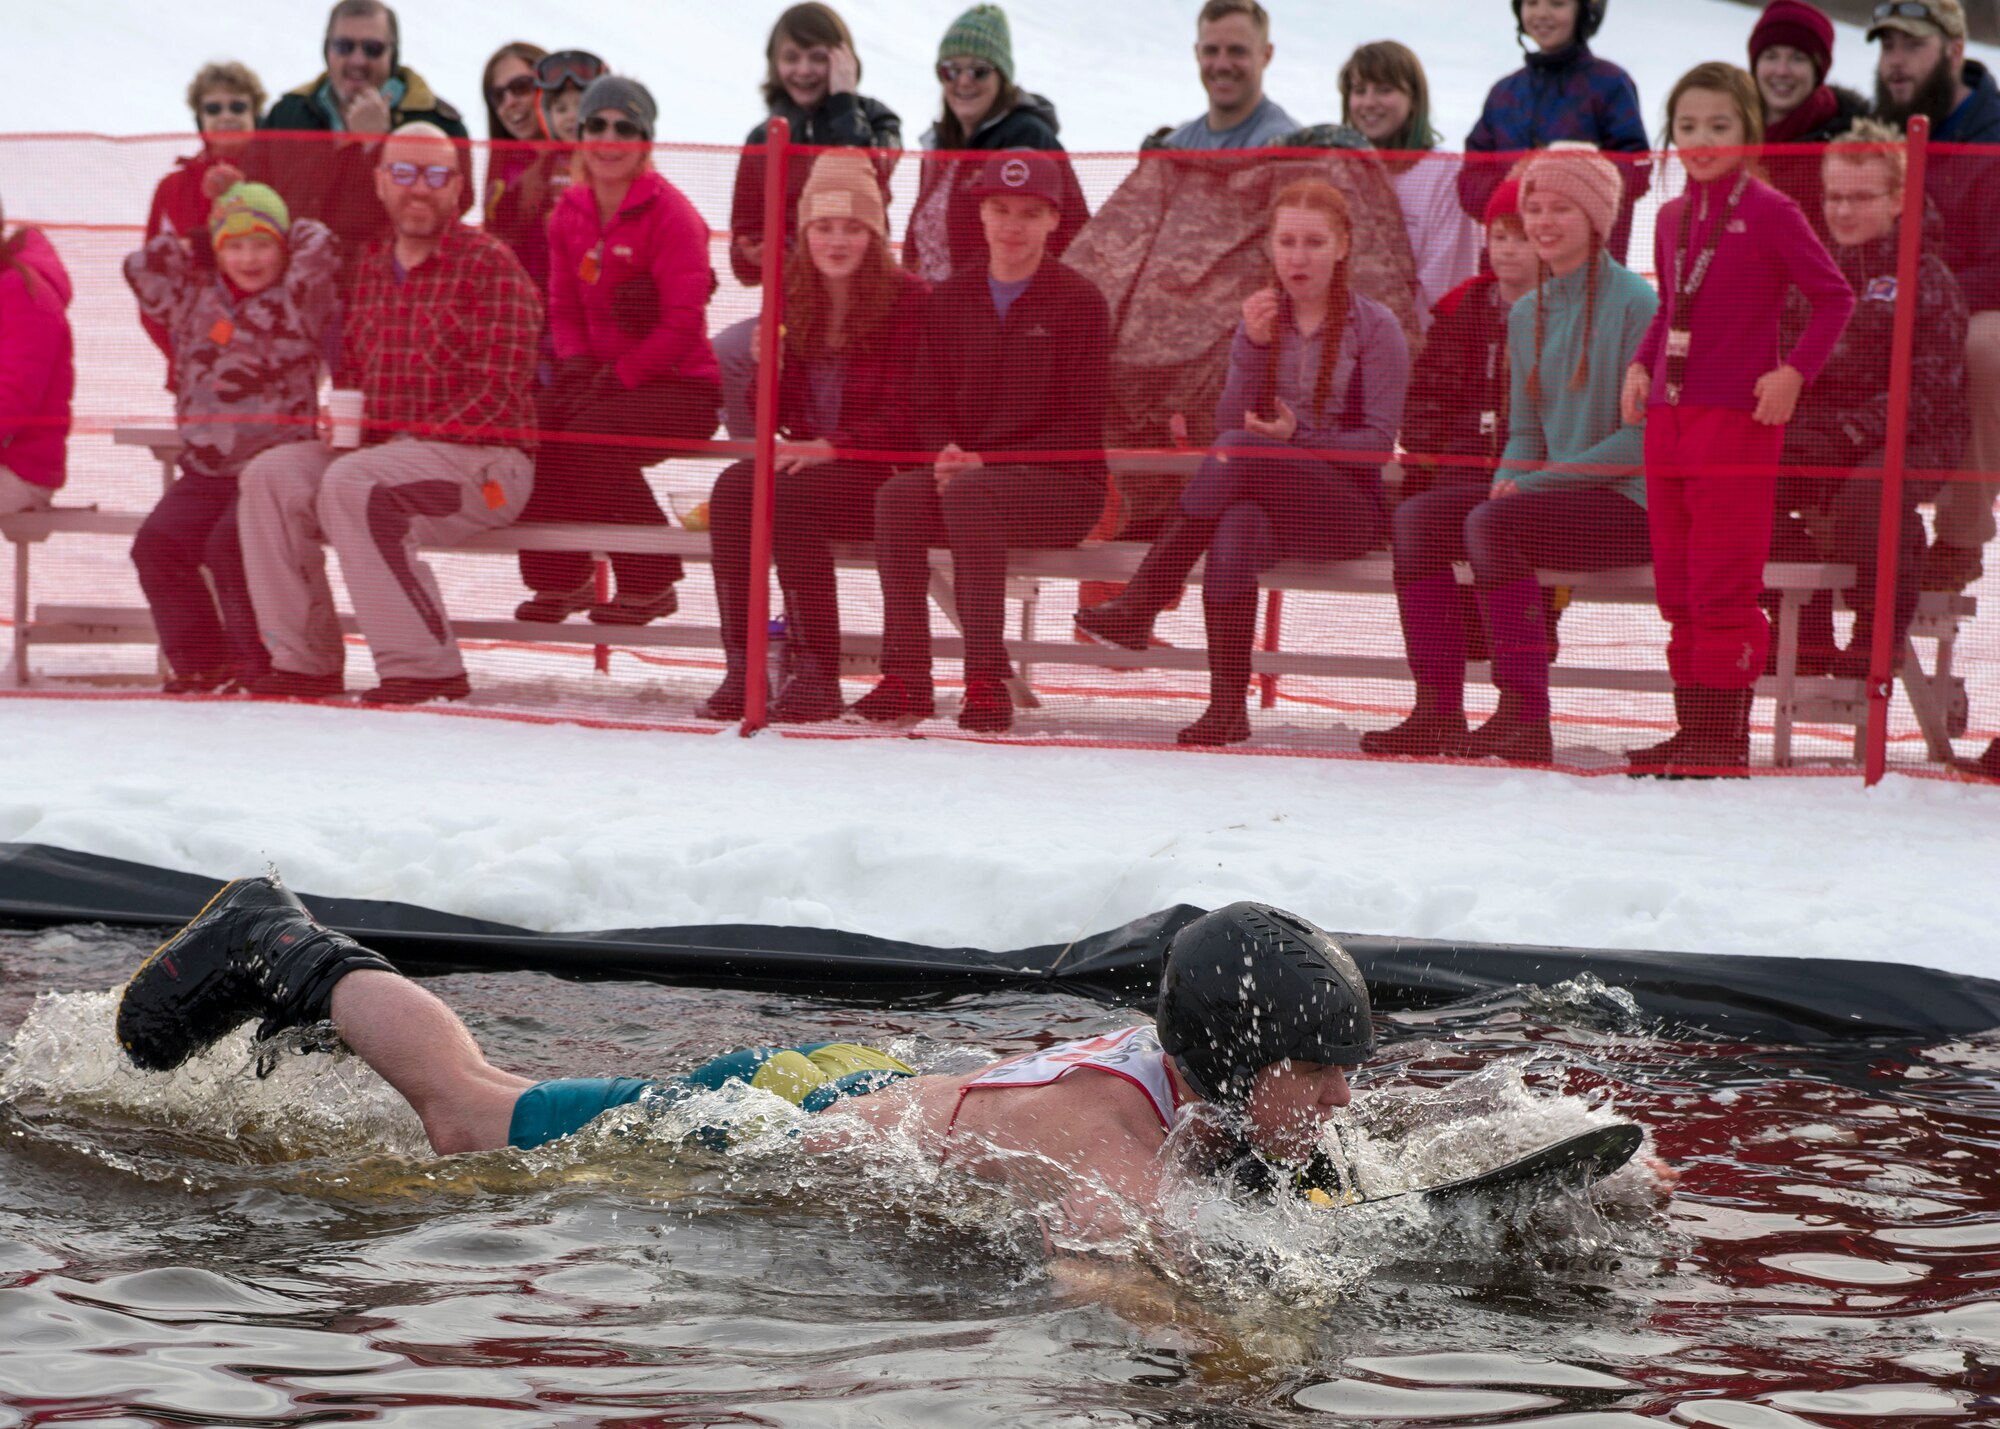 Ross Funches, a participant of the 2018 Slush Cup, swims to the finish line at Joint Base Elmendorf-Richardson’s Hillberg Ski Area, March 18, 2018.The Slush Cup is a two-fold annual event celebrating the change in weather, consisting of skiers and snowboarders trying to make it across a man-made slush pond without falling.